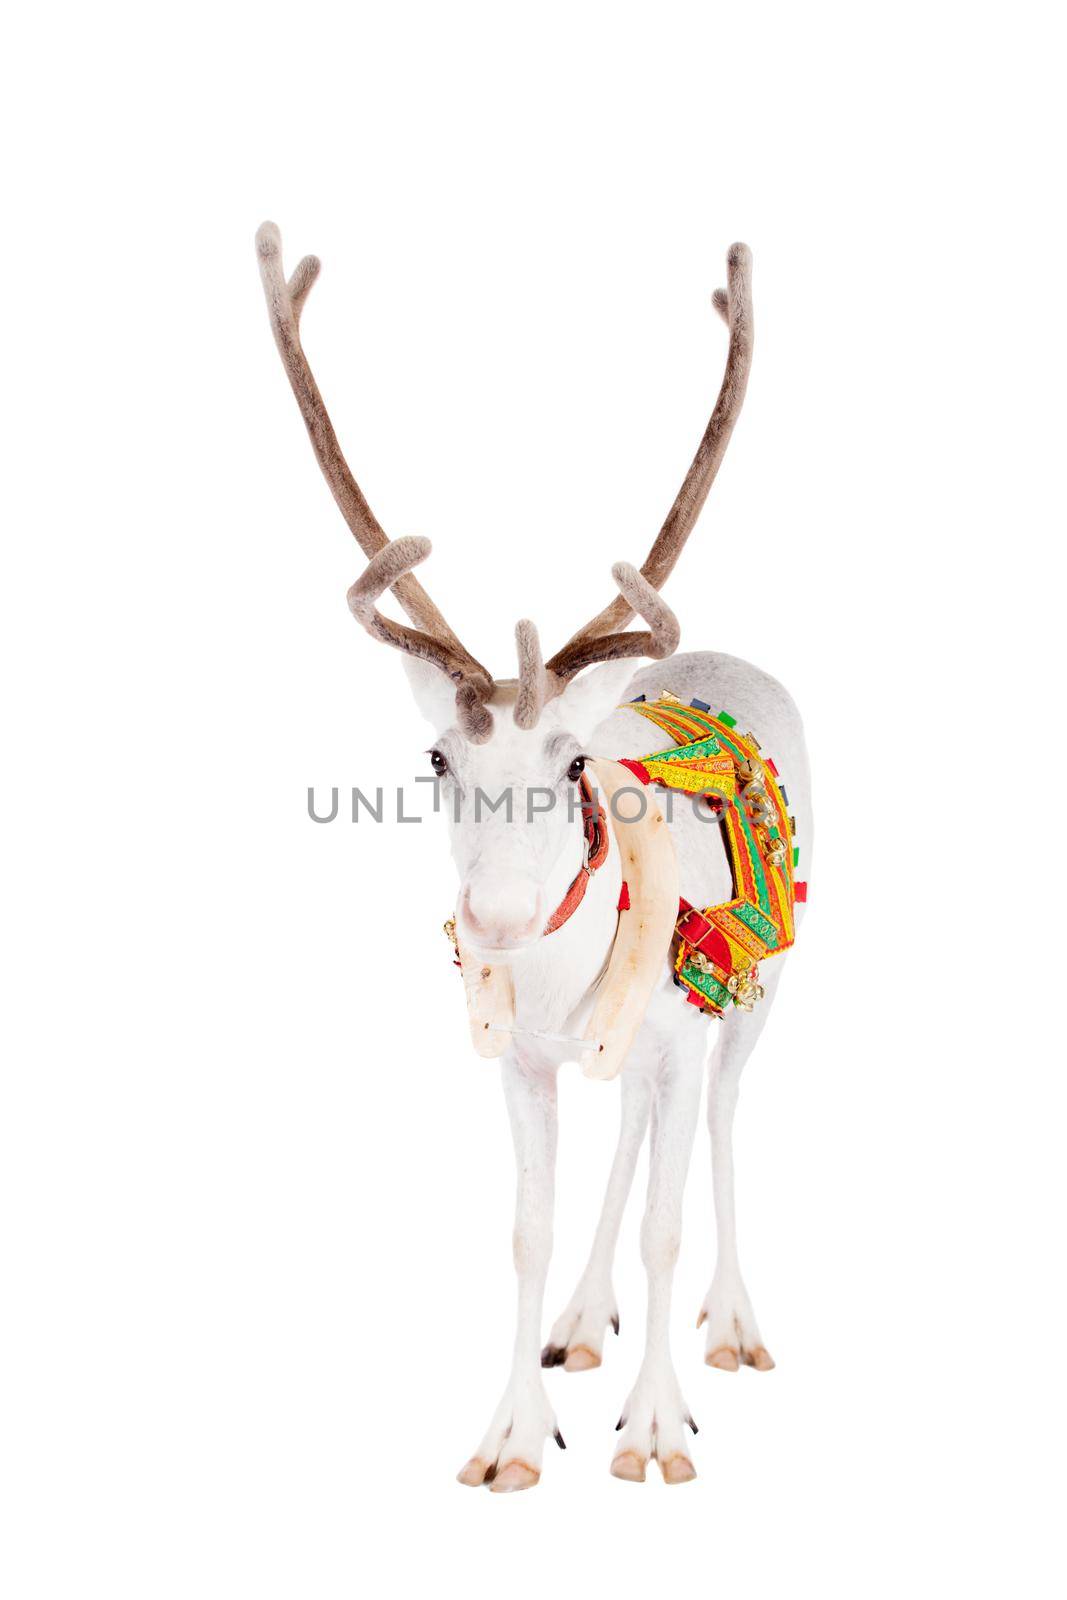 Reindeer or caribou wearing traditional harness by RosaJay